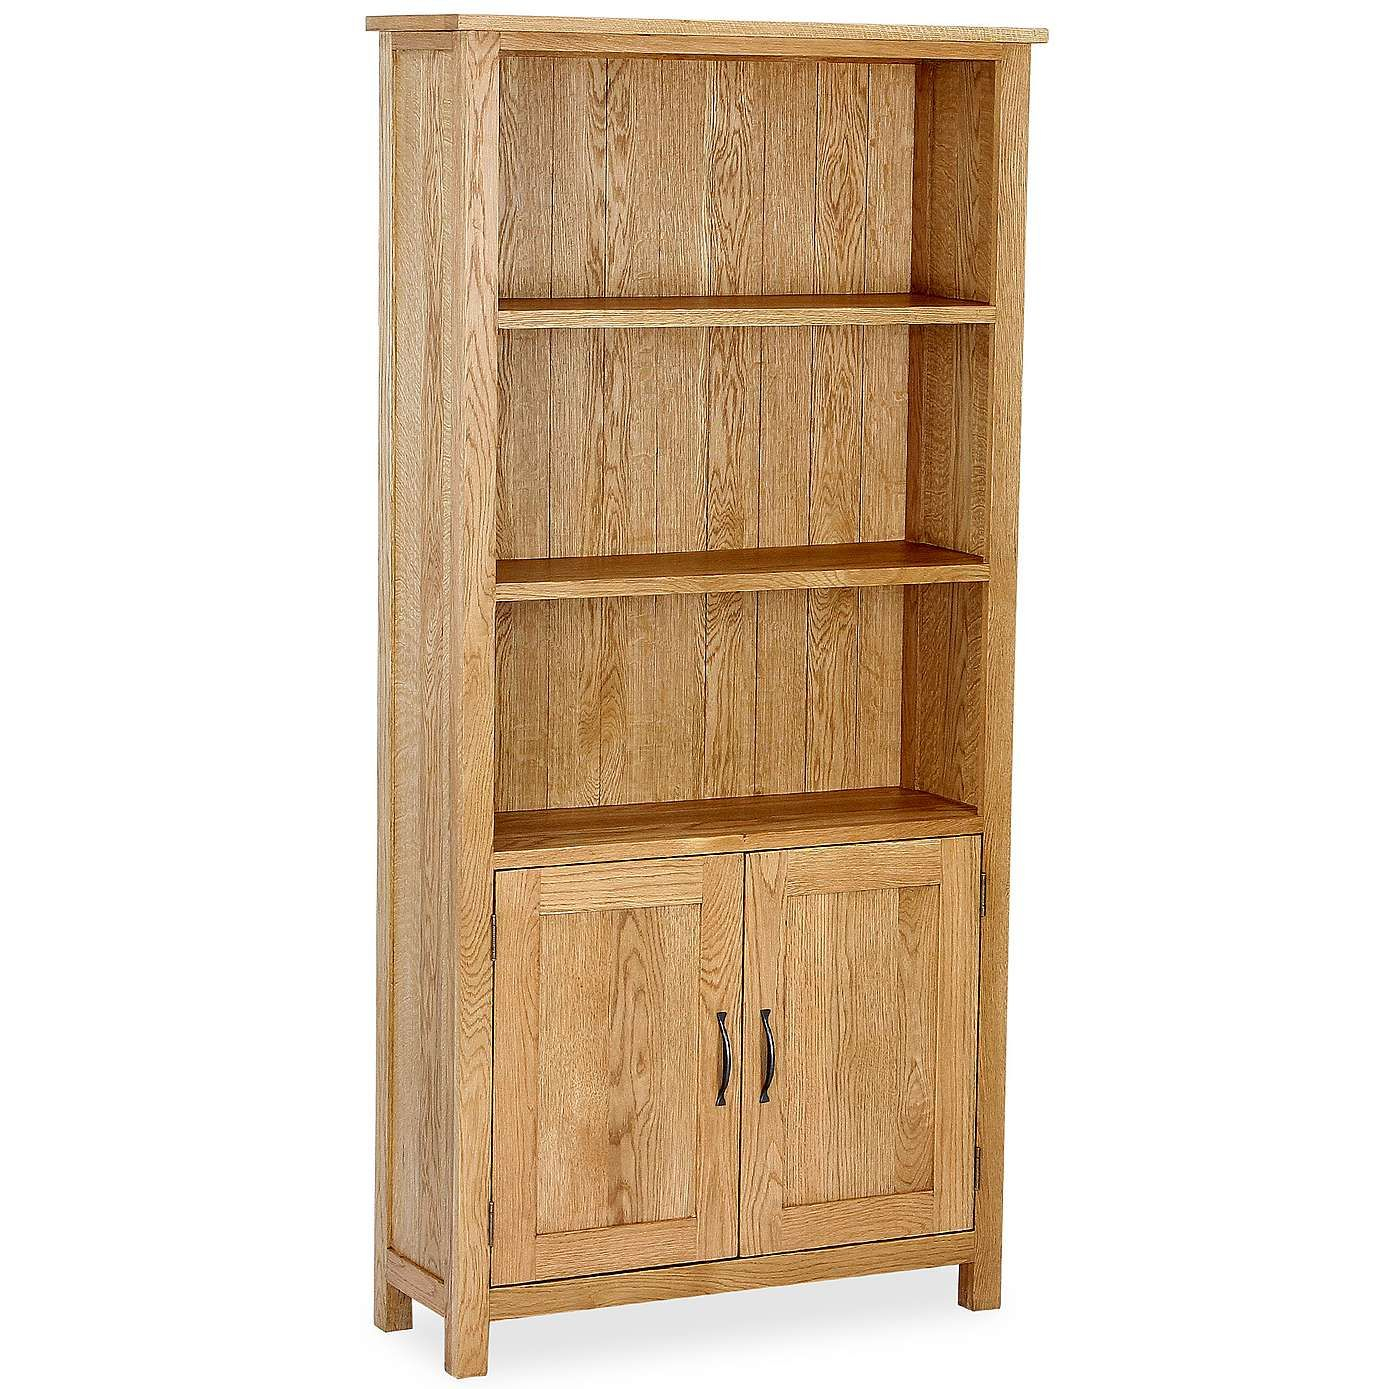 Sidmouth Oak Bookcase Bookcase Storage Spaces Solid Oak throughout sizing 1389 X 1389